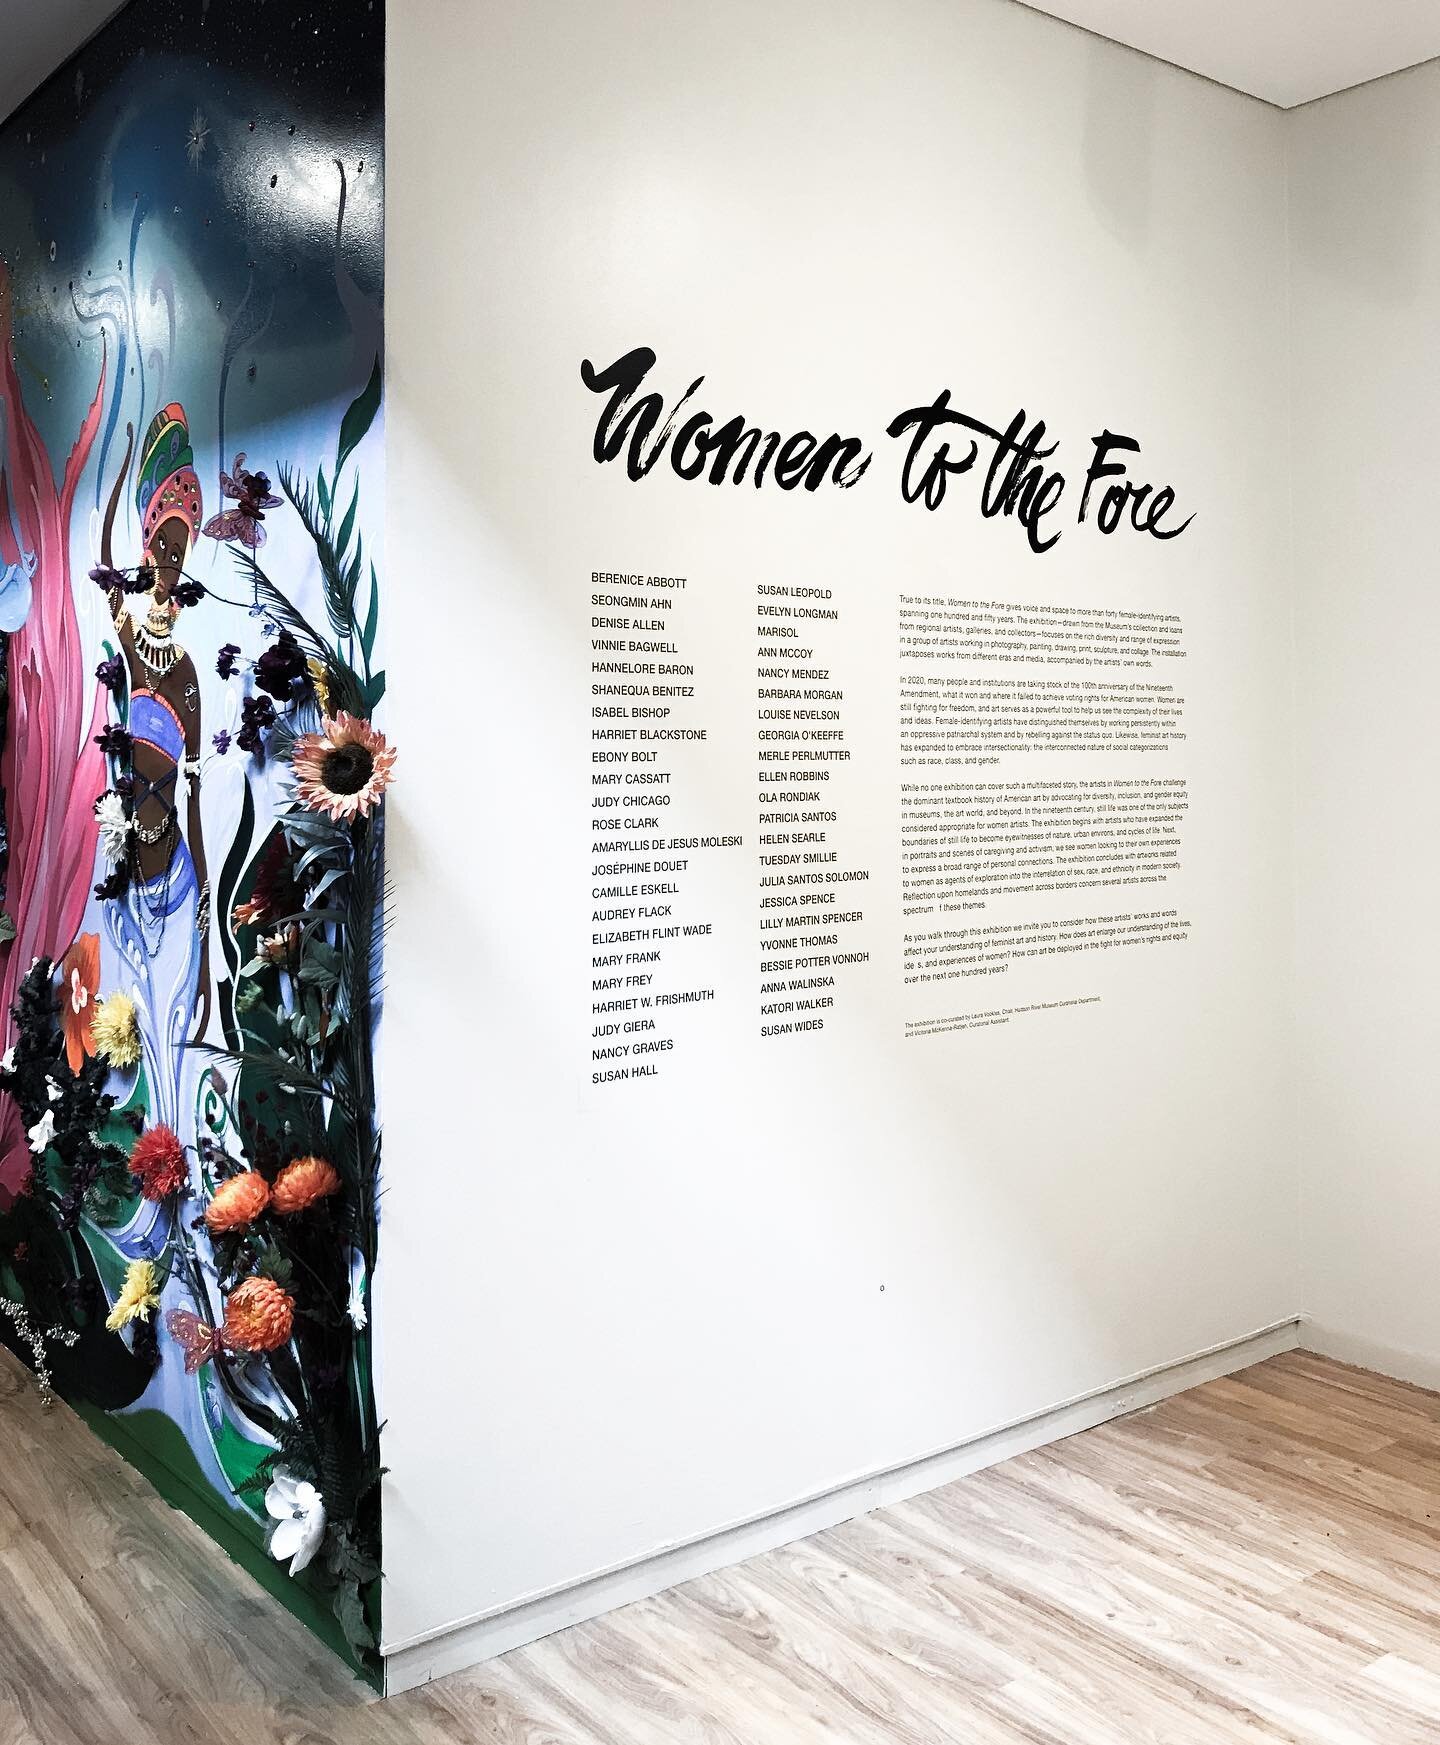 &ldquo;Women to the Fore&rdquo; exhibition is opening this Friday featuring 45 female-identifying artists at @hudsonrivermuseum 💙 (with my brush letters made exclusively for the show identity 💪)

📷 by @camilleknop 
.
.
.
#womentotgefore #hudsonriv